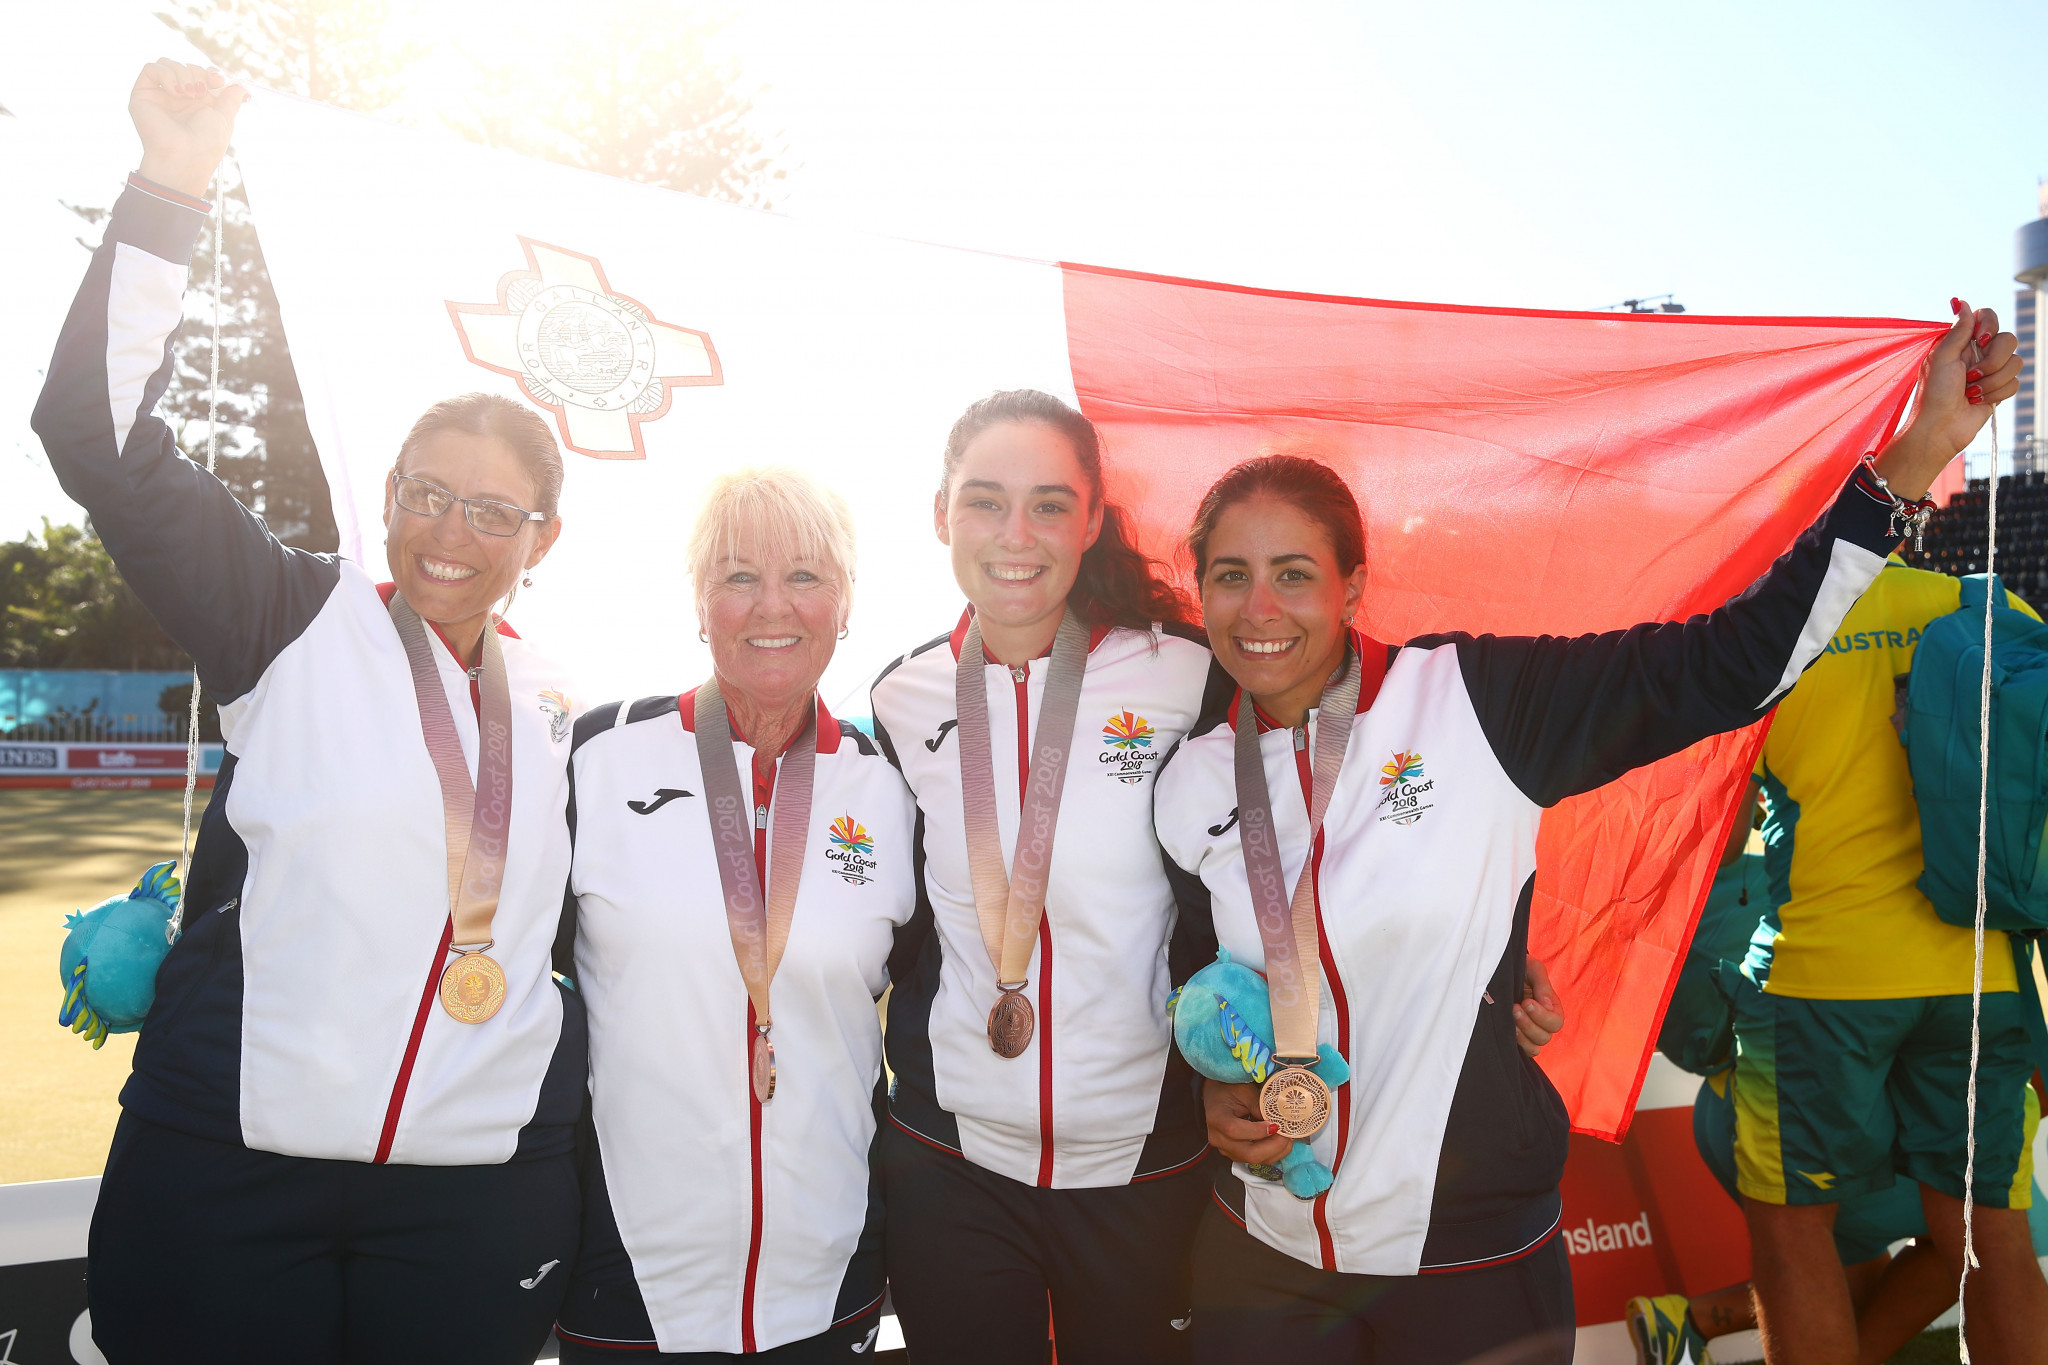 Three members of the same family won lawn bowls bronze for Malta in the women's fours at Gold Coast 2018 ©Getty Images 